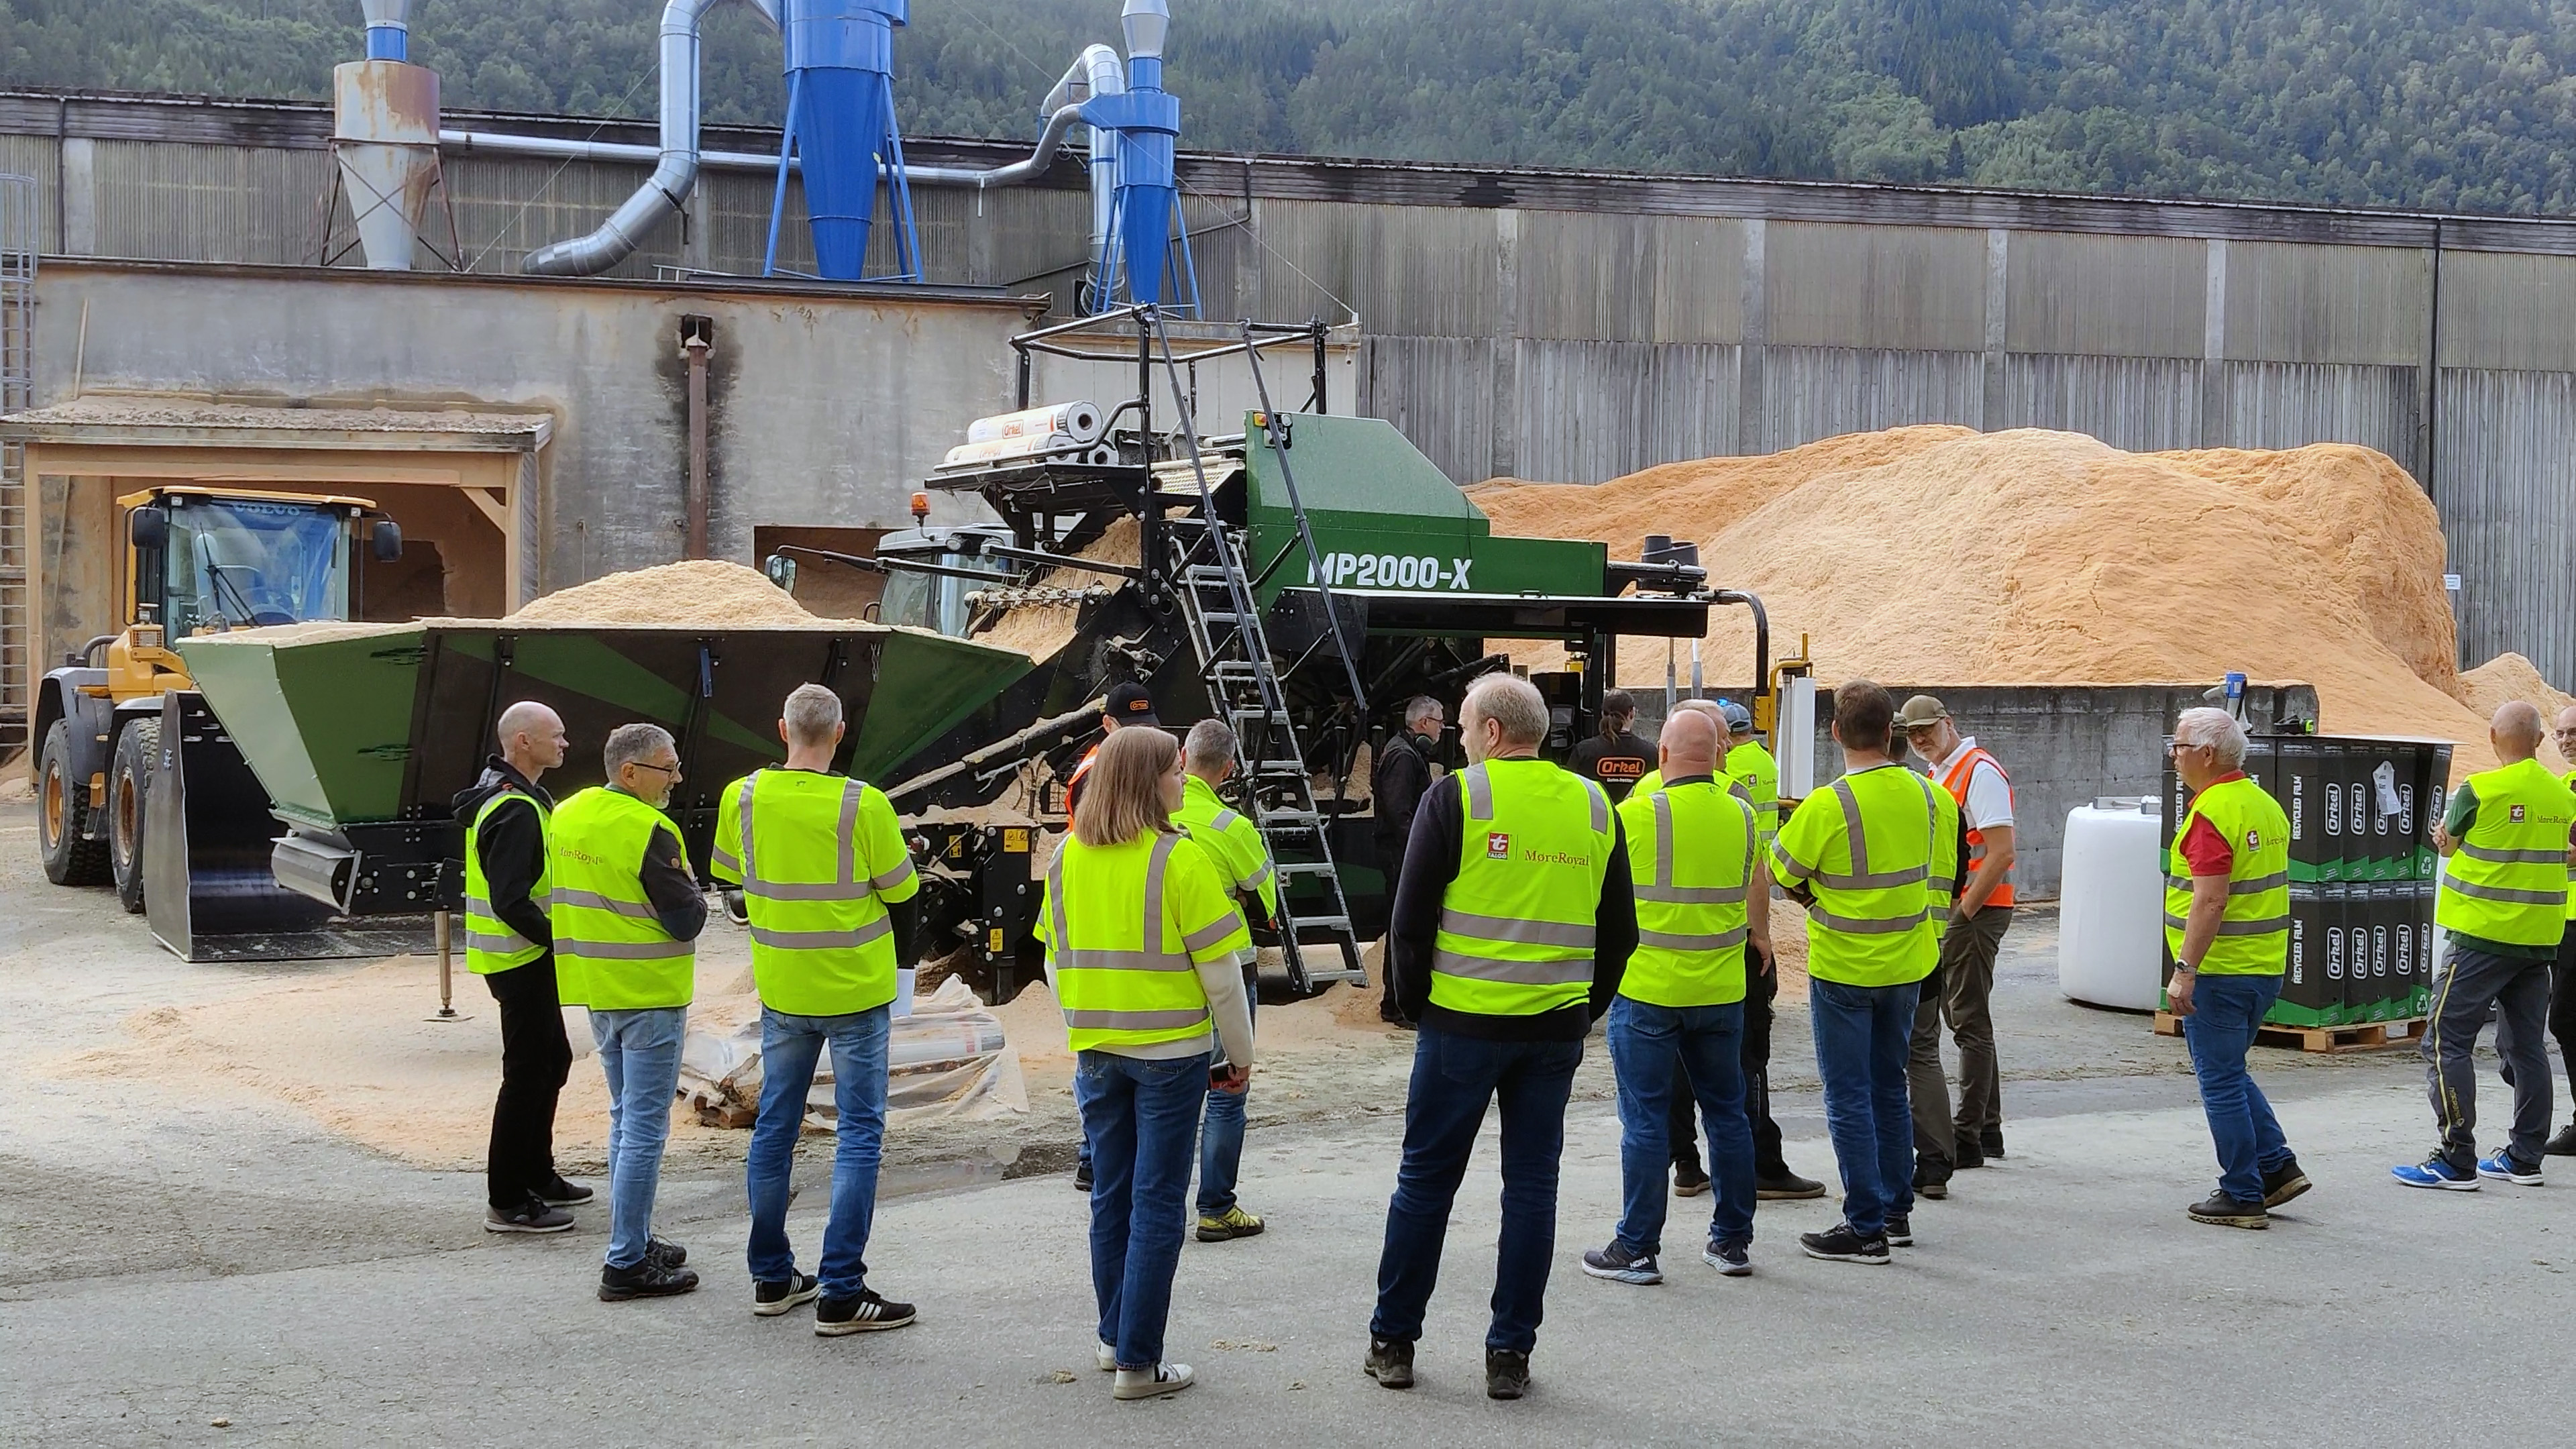 A crowd of people wearing yellow safety vests standing in front of an MP2000-X baling wood shavings, with a large pile of wood shavings in the background.